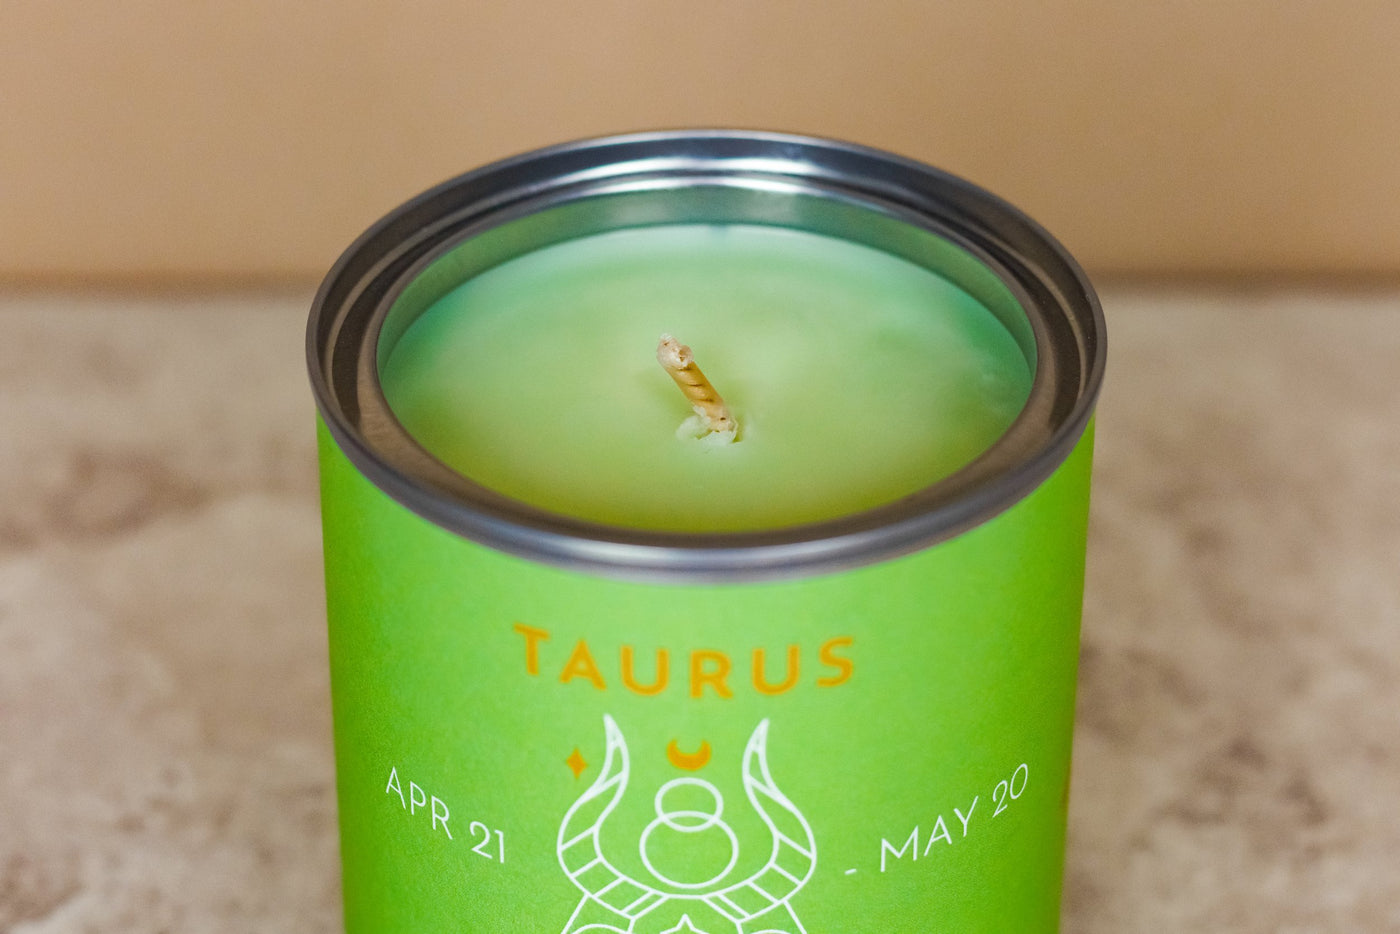 Wildrace Zodiac Collection Taurus Candle - Radical Giving 